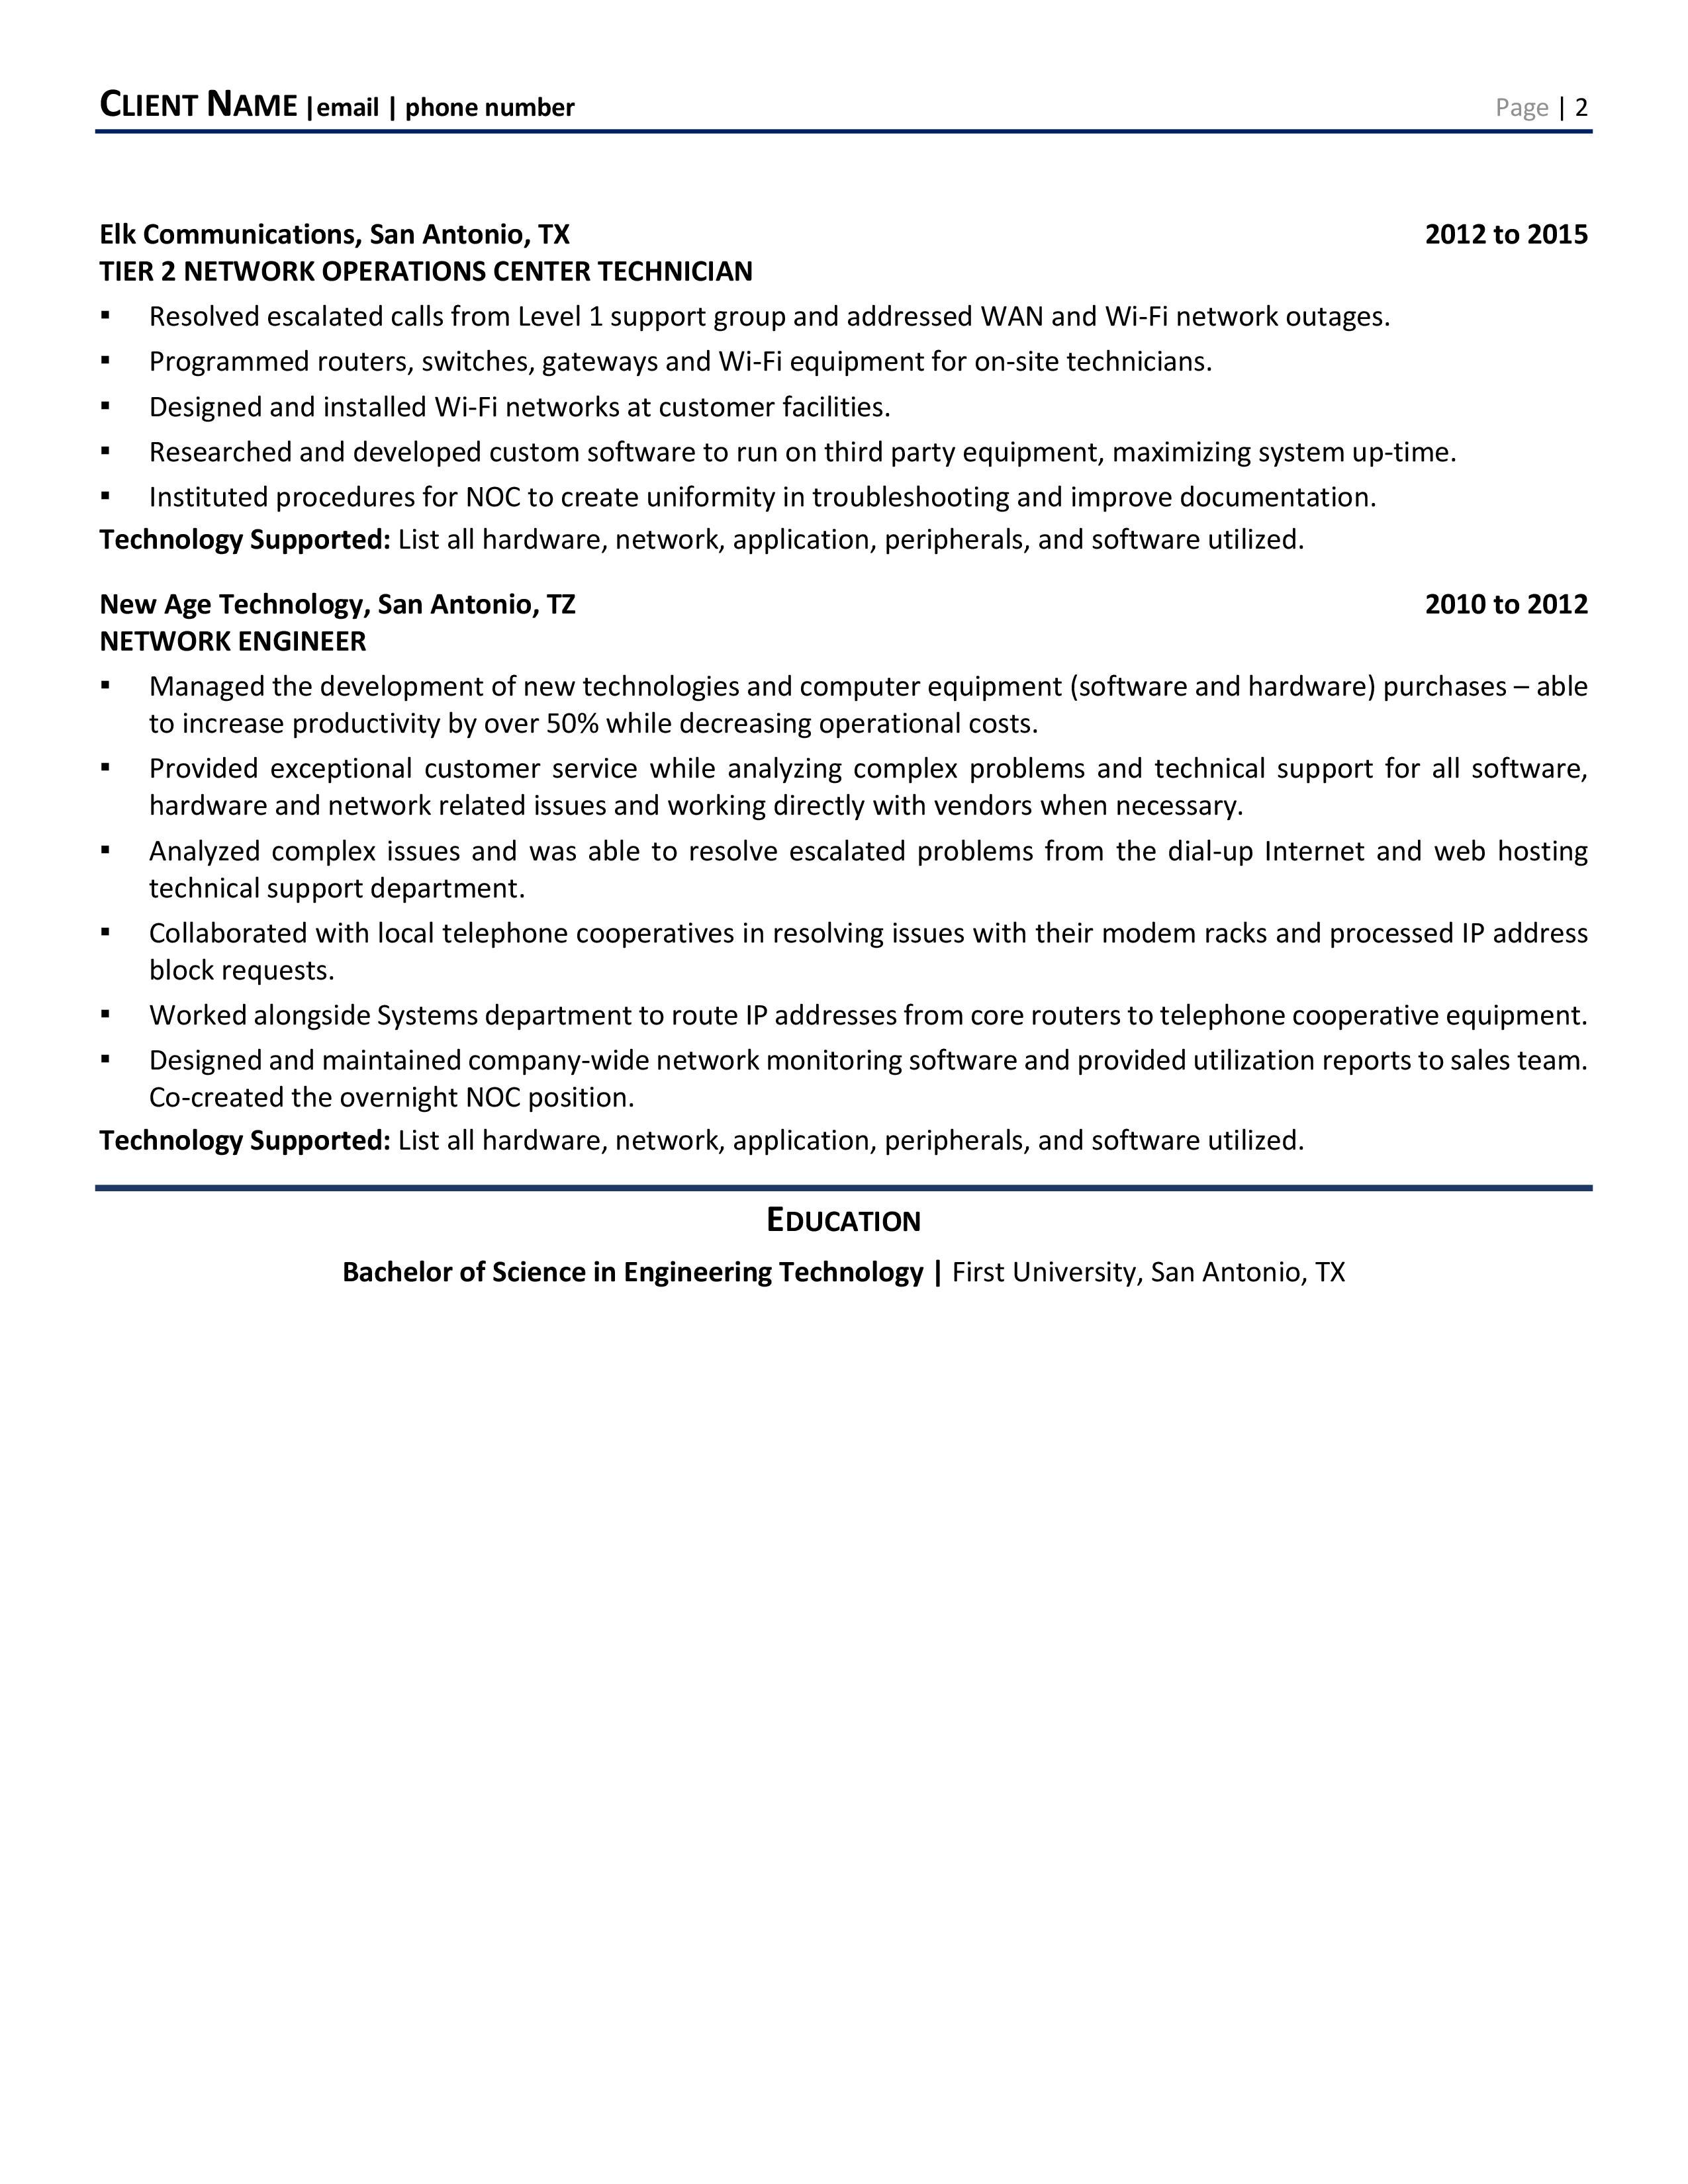 profile summary in resume for desktop support engineer